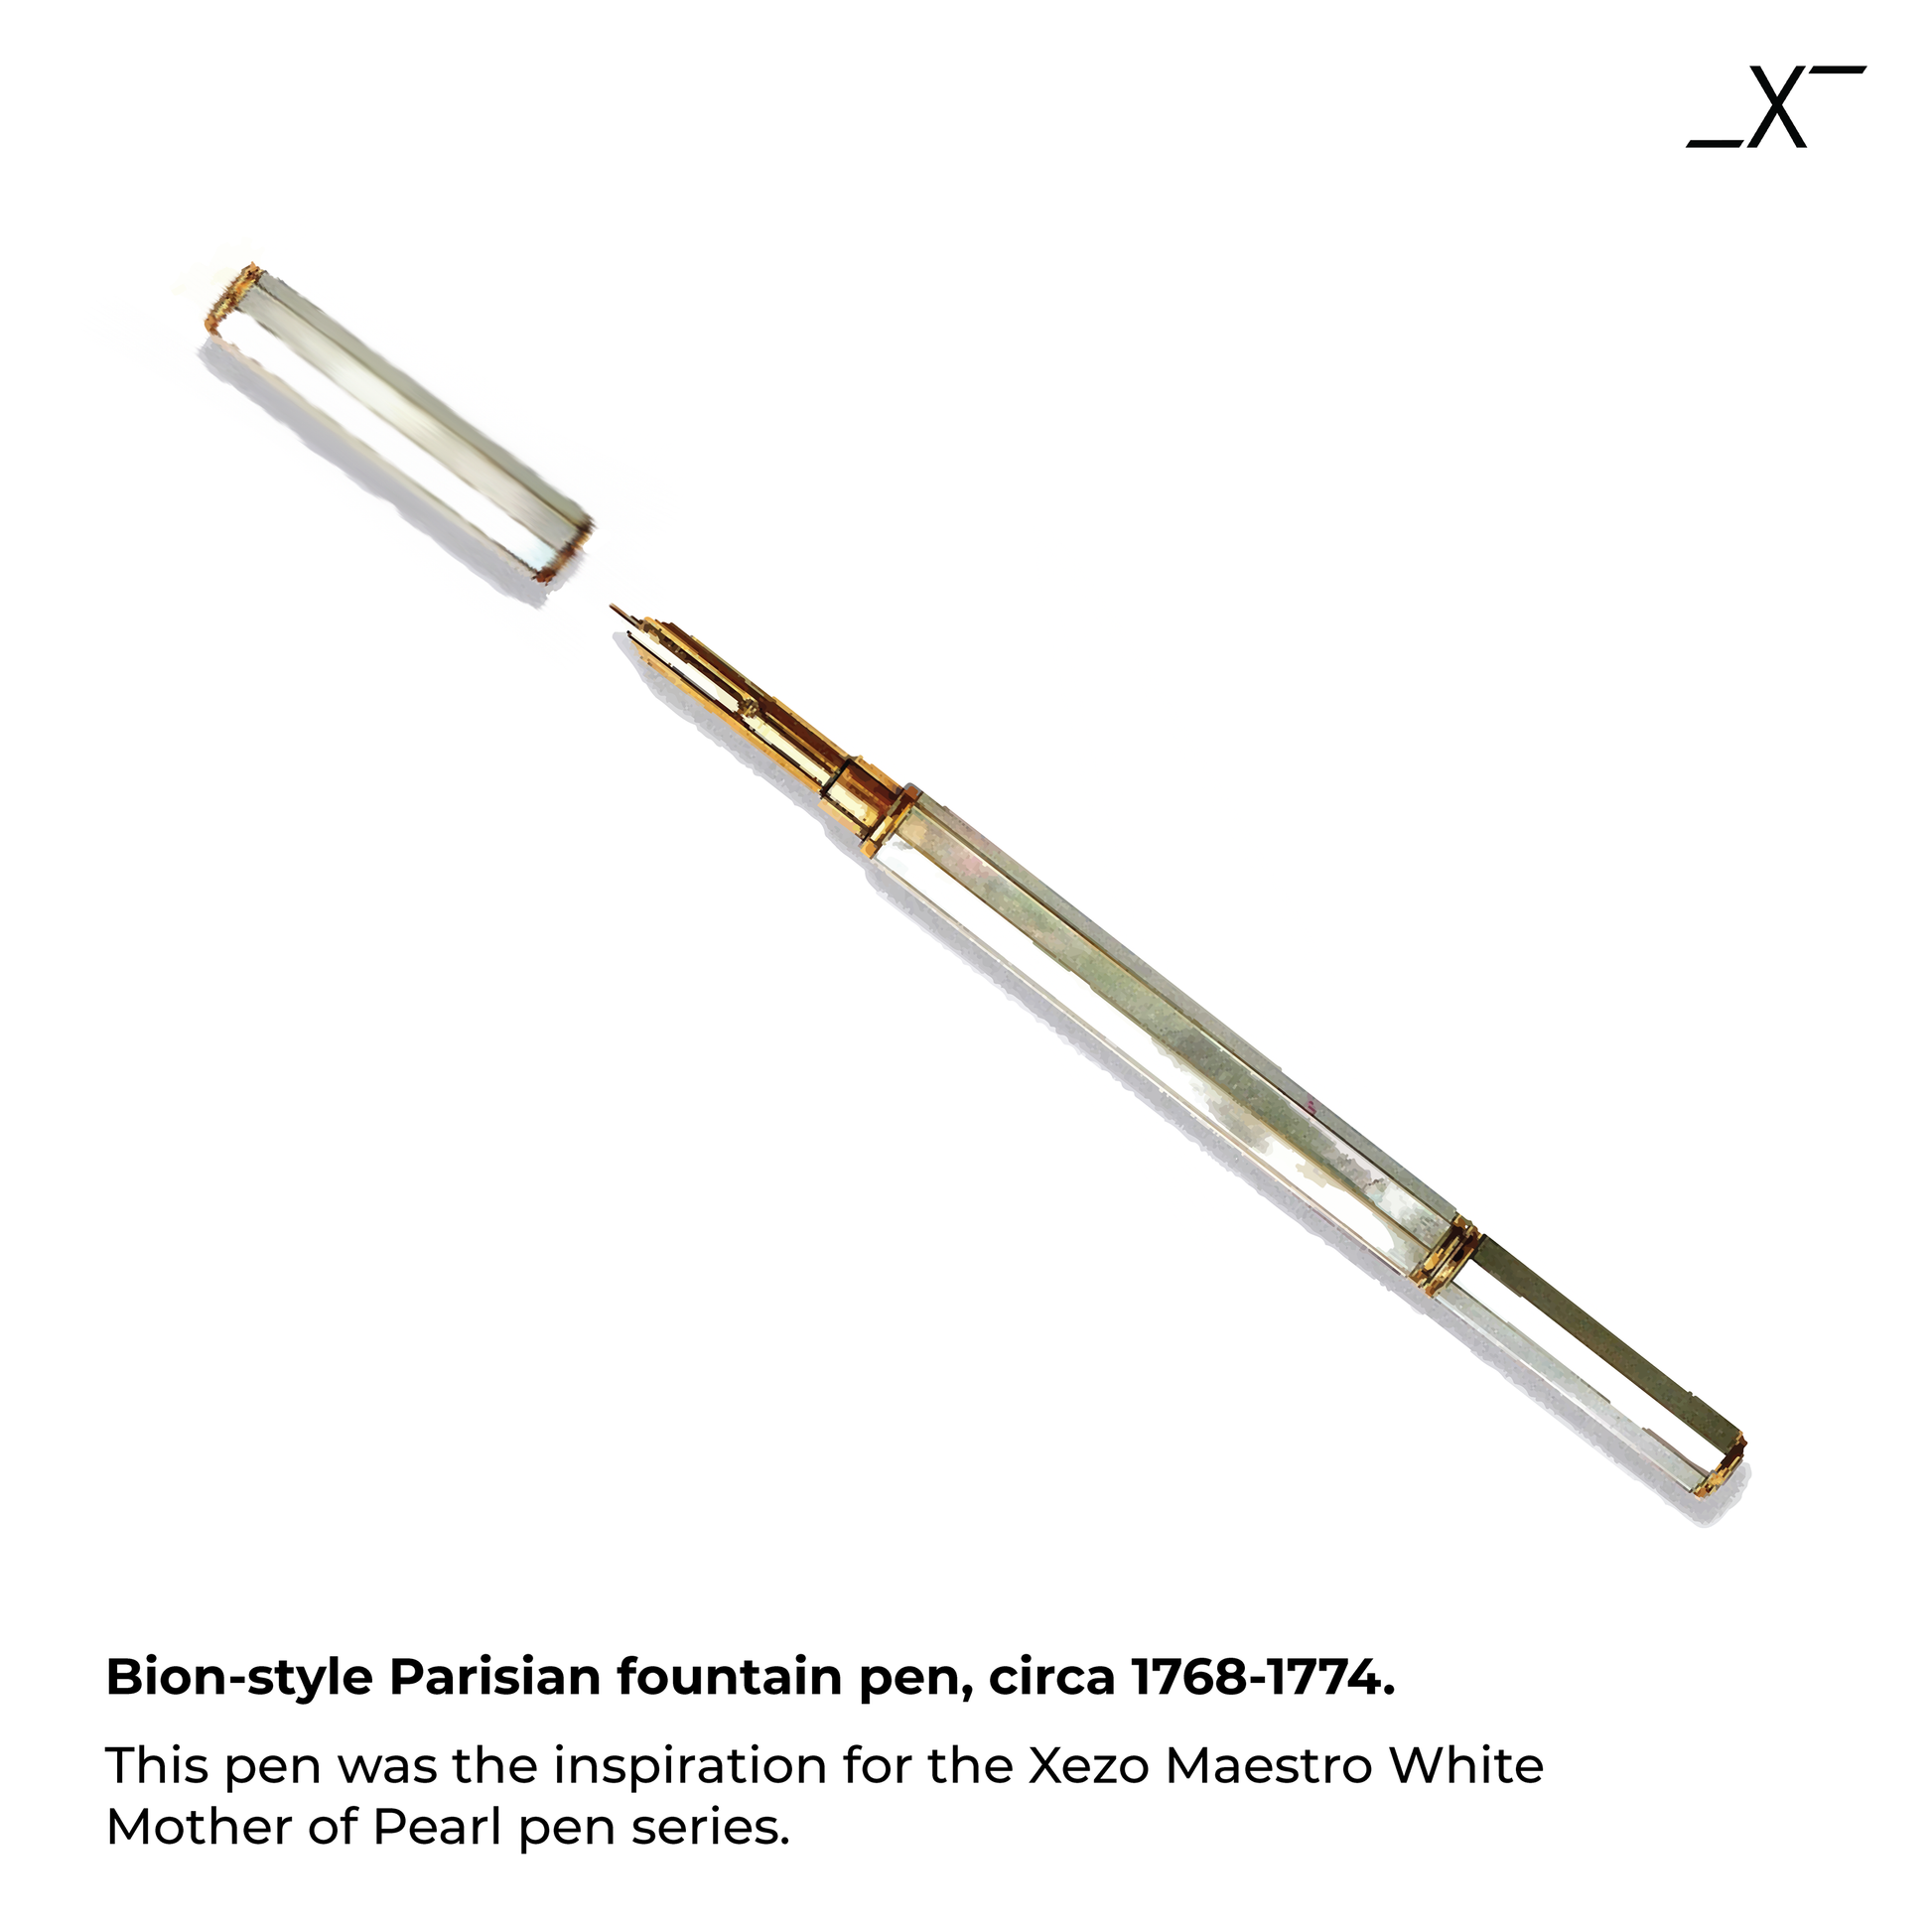 Xezo - An image of the Bion Style Parisian fountain pen, Circa 1768-1744 which was the inspiration for the Xezo Maestro White MOP series